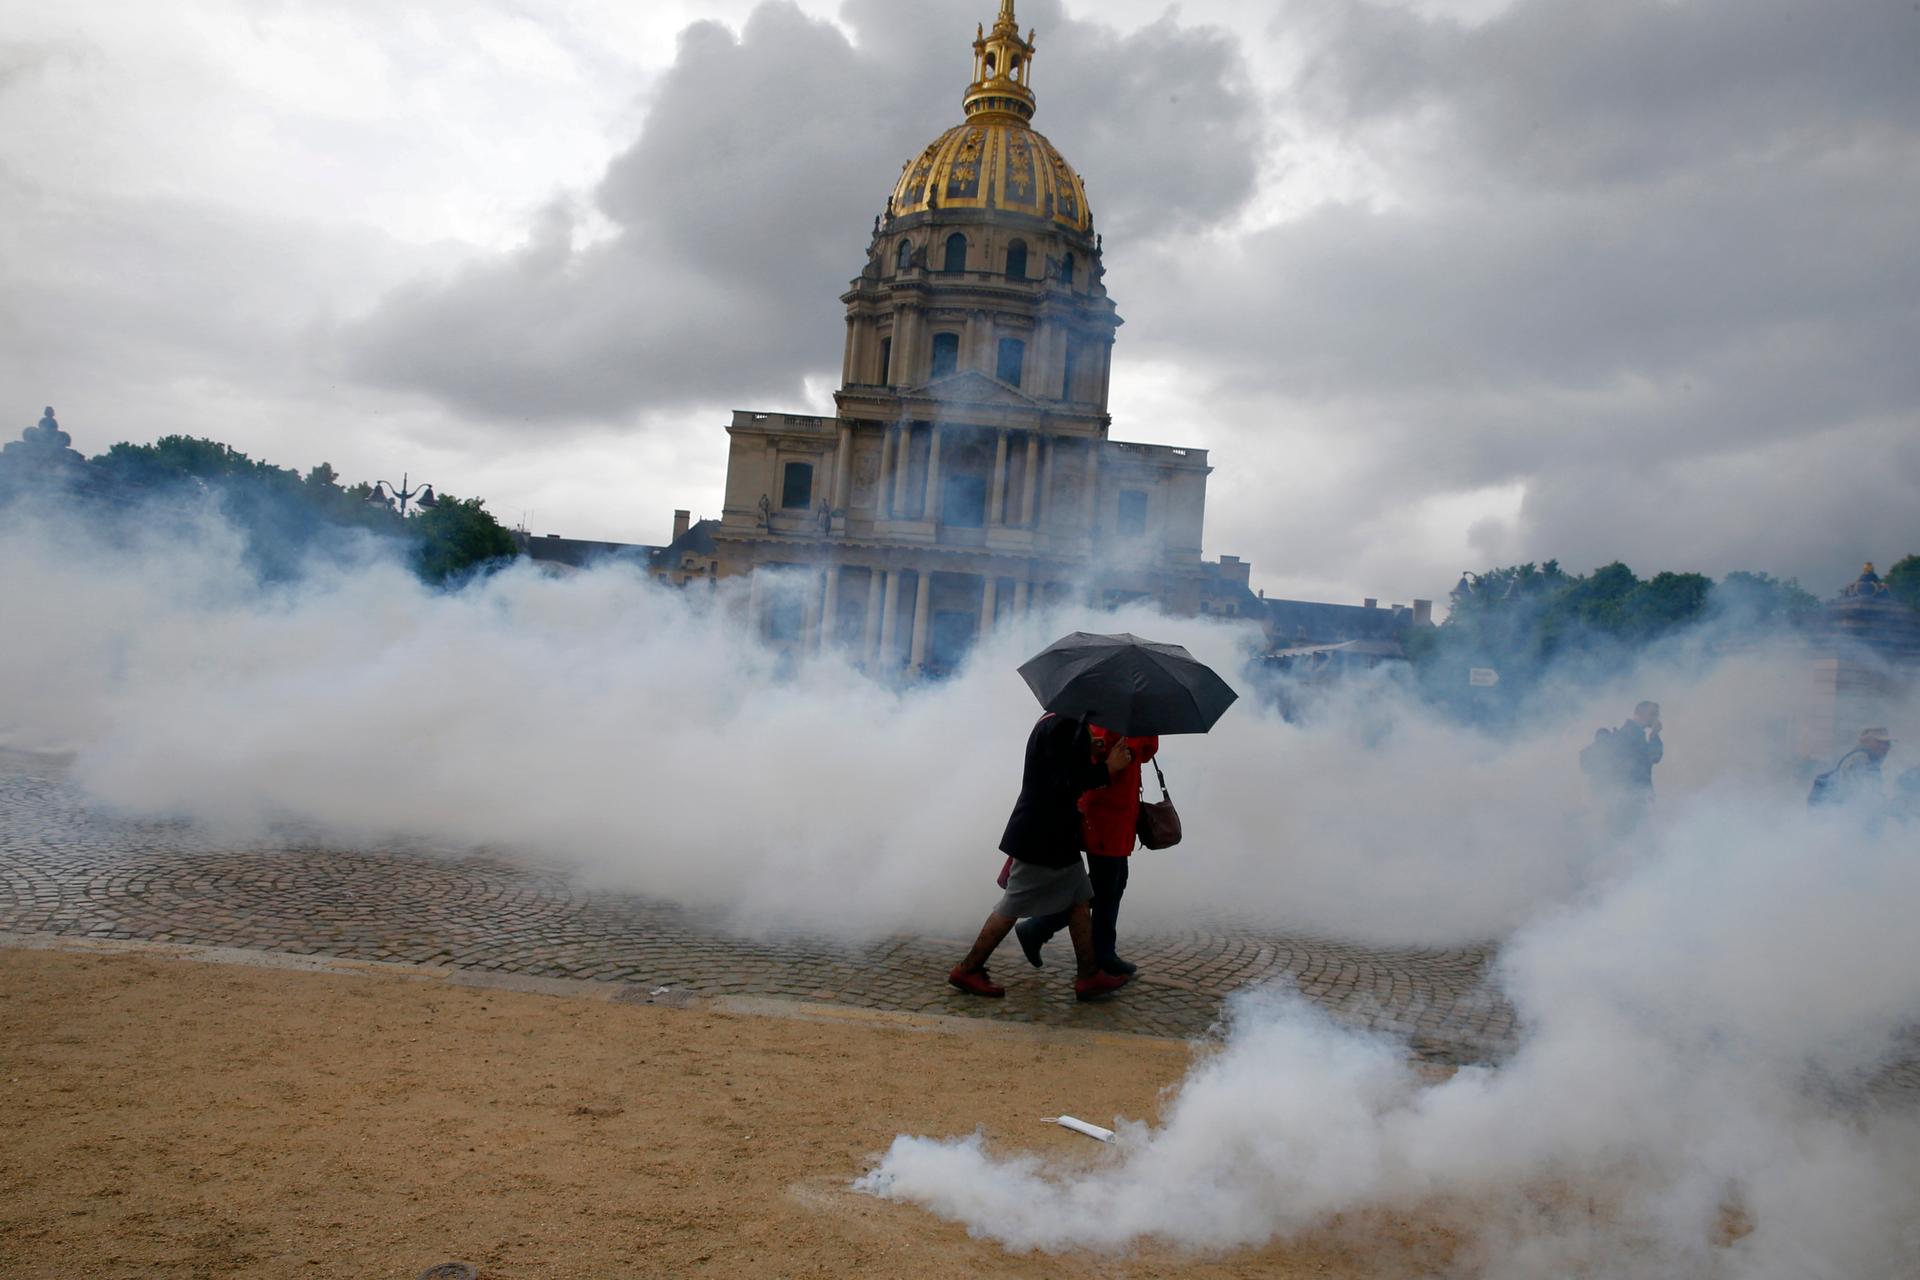 Clouds of tear gas surround people near the Invalides monument during clashes between protesters and French police during a demonstration against French labor law reform in Paris. May 12, 2016.